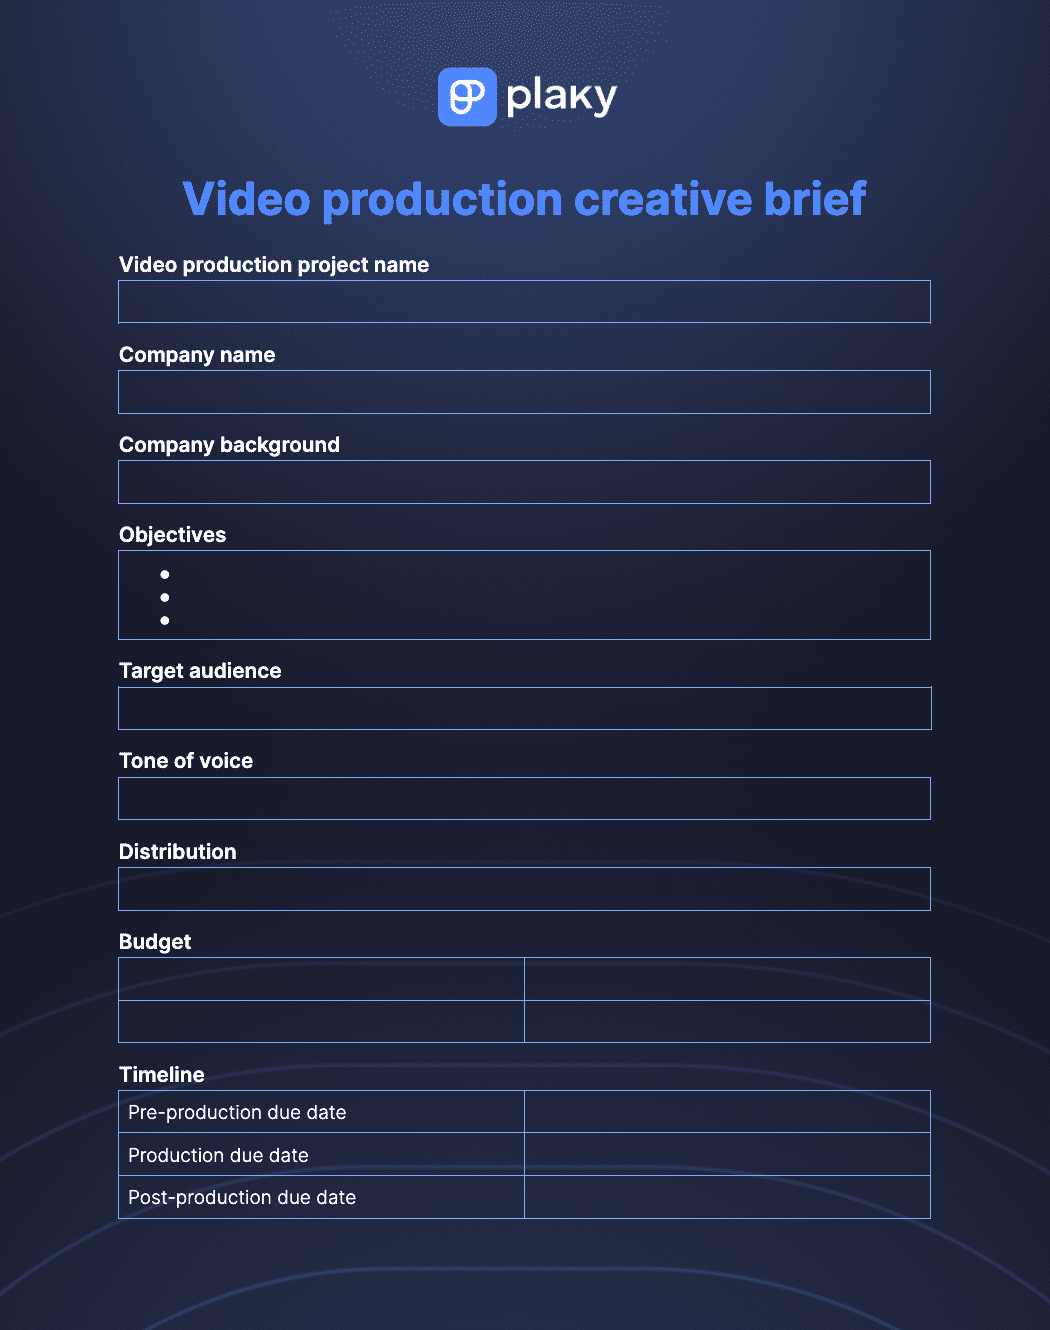 Video production creative brief template